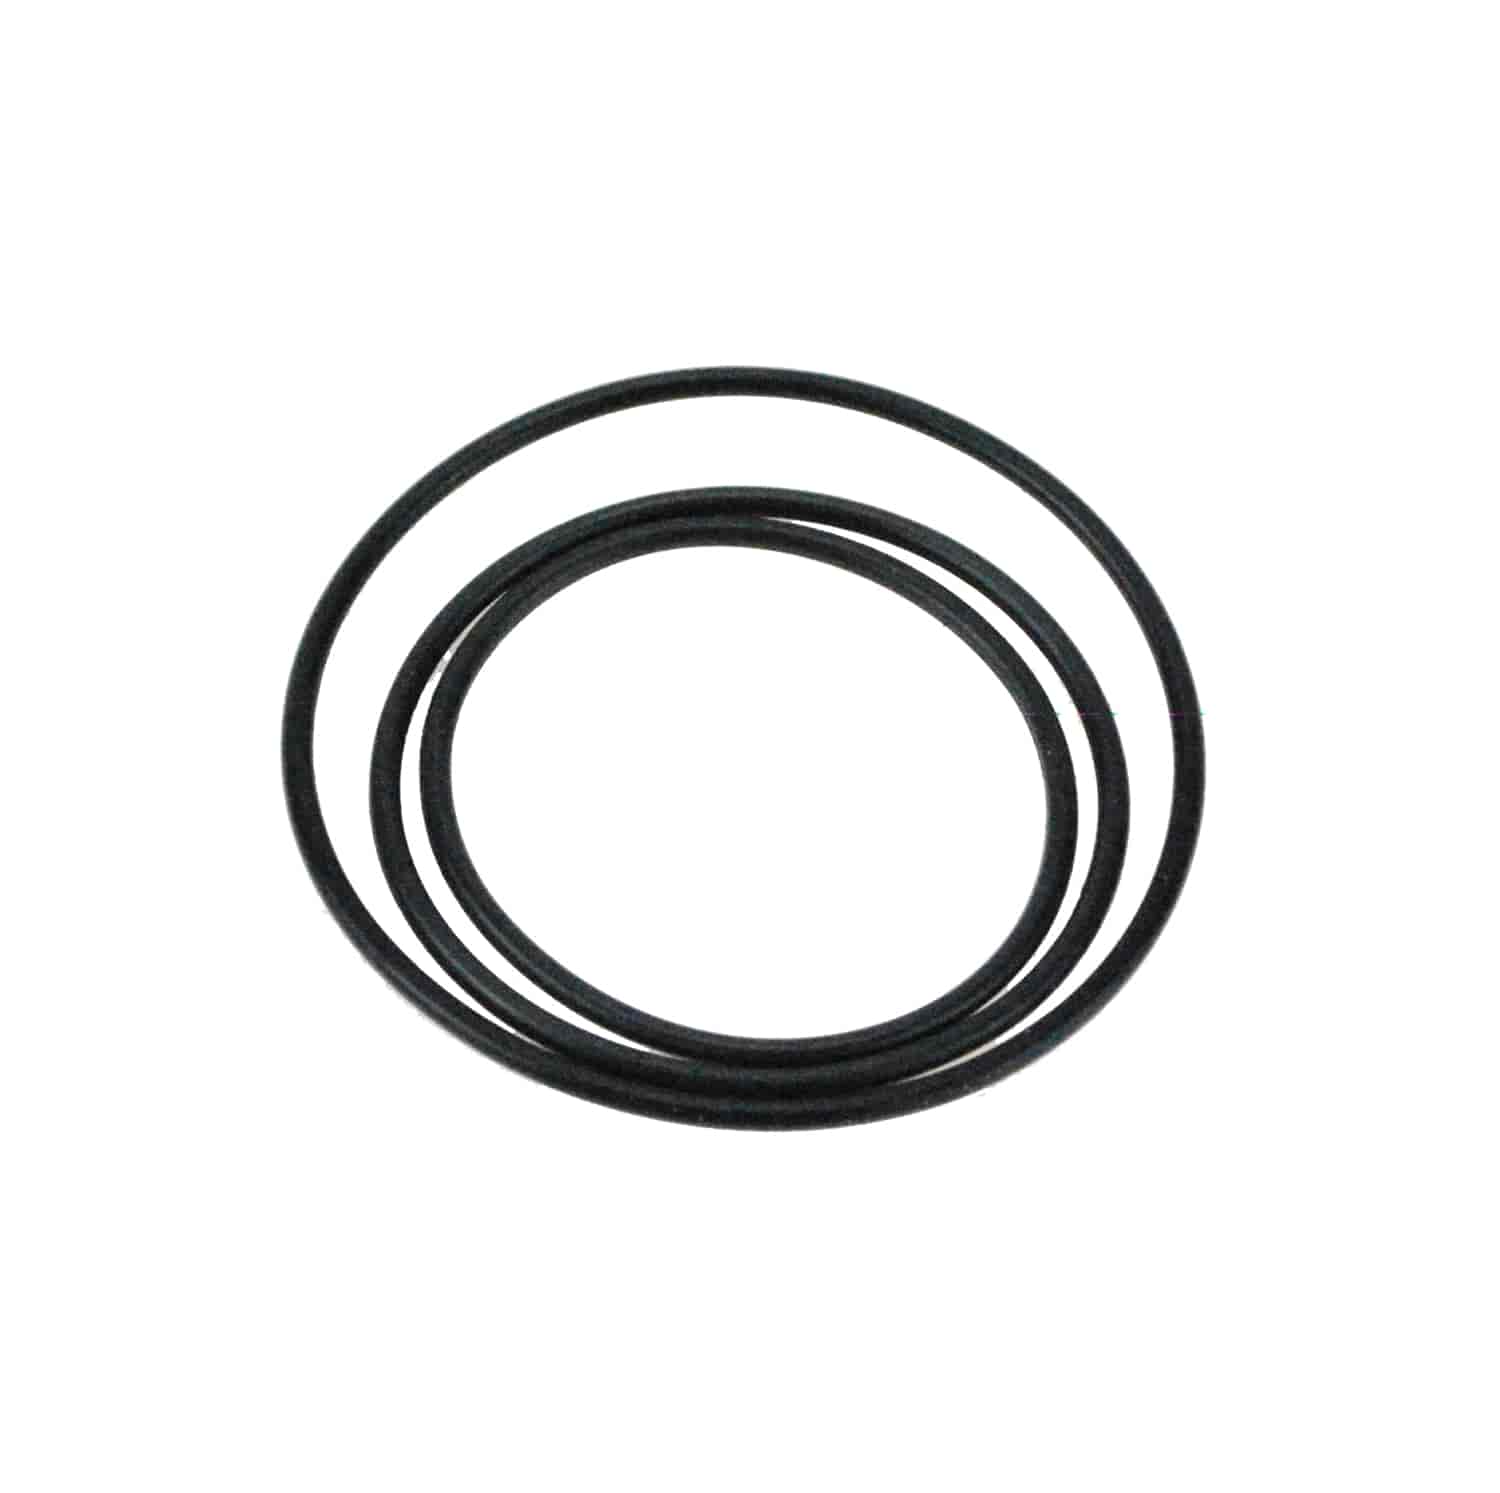 Replacement O-Ring Set Fits All Standard Duty Hydraulic Bearings